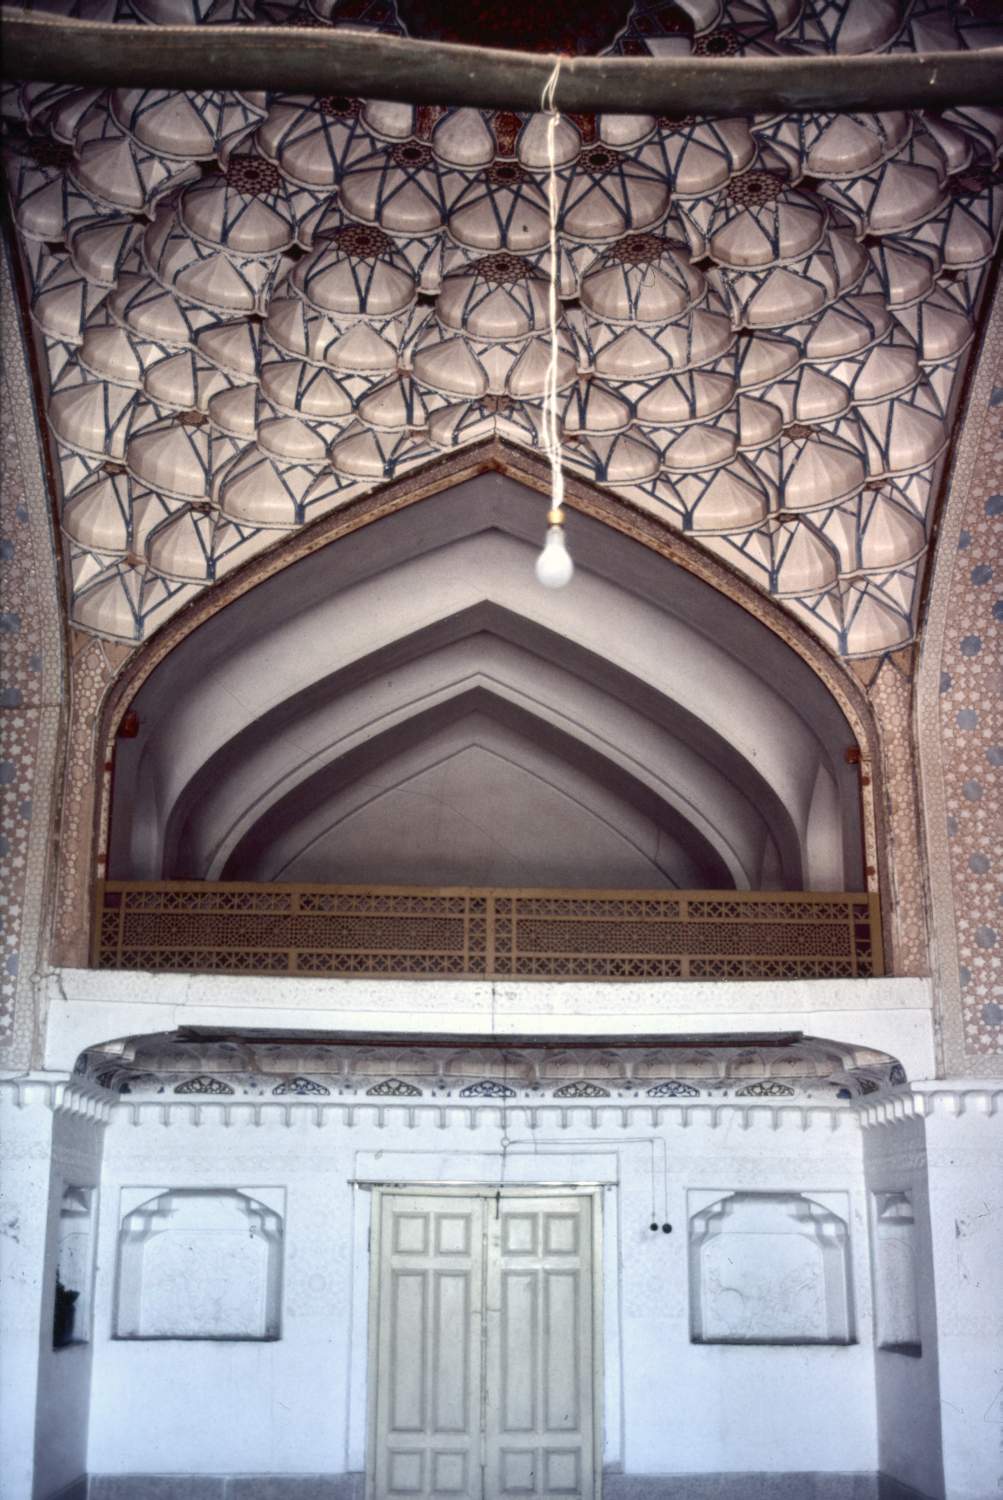 Private house in Julfa neighborhood of Isfahan, interior view of a muqarnas vault